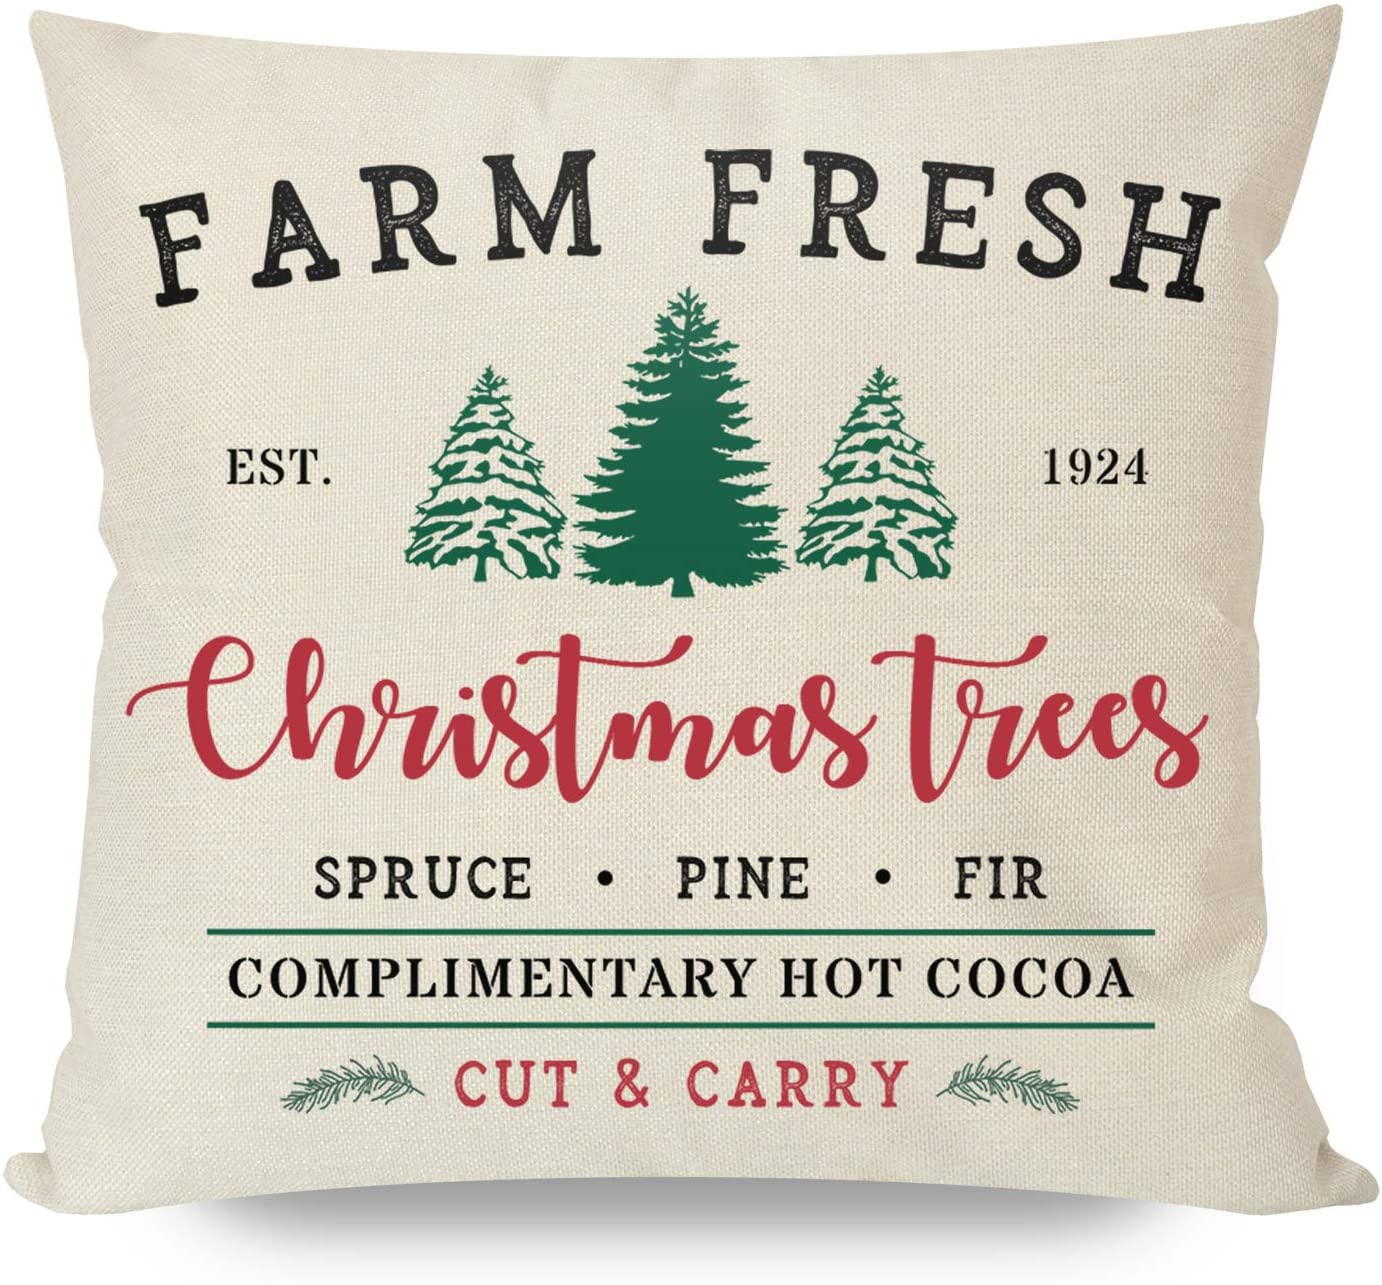 PANDICORN Farmhouse Christmas Pillows Covers 18x18 Set of 4, Red and Green Christmas Trees Truck, for Home Couch Outdoor Indoor